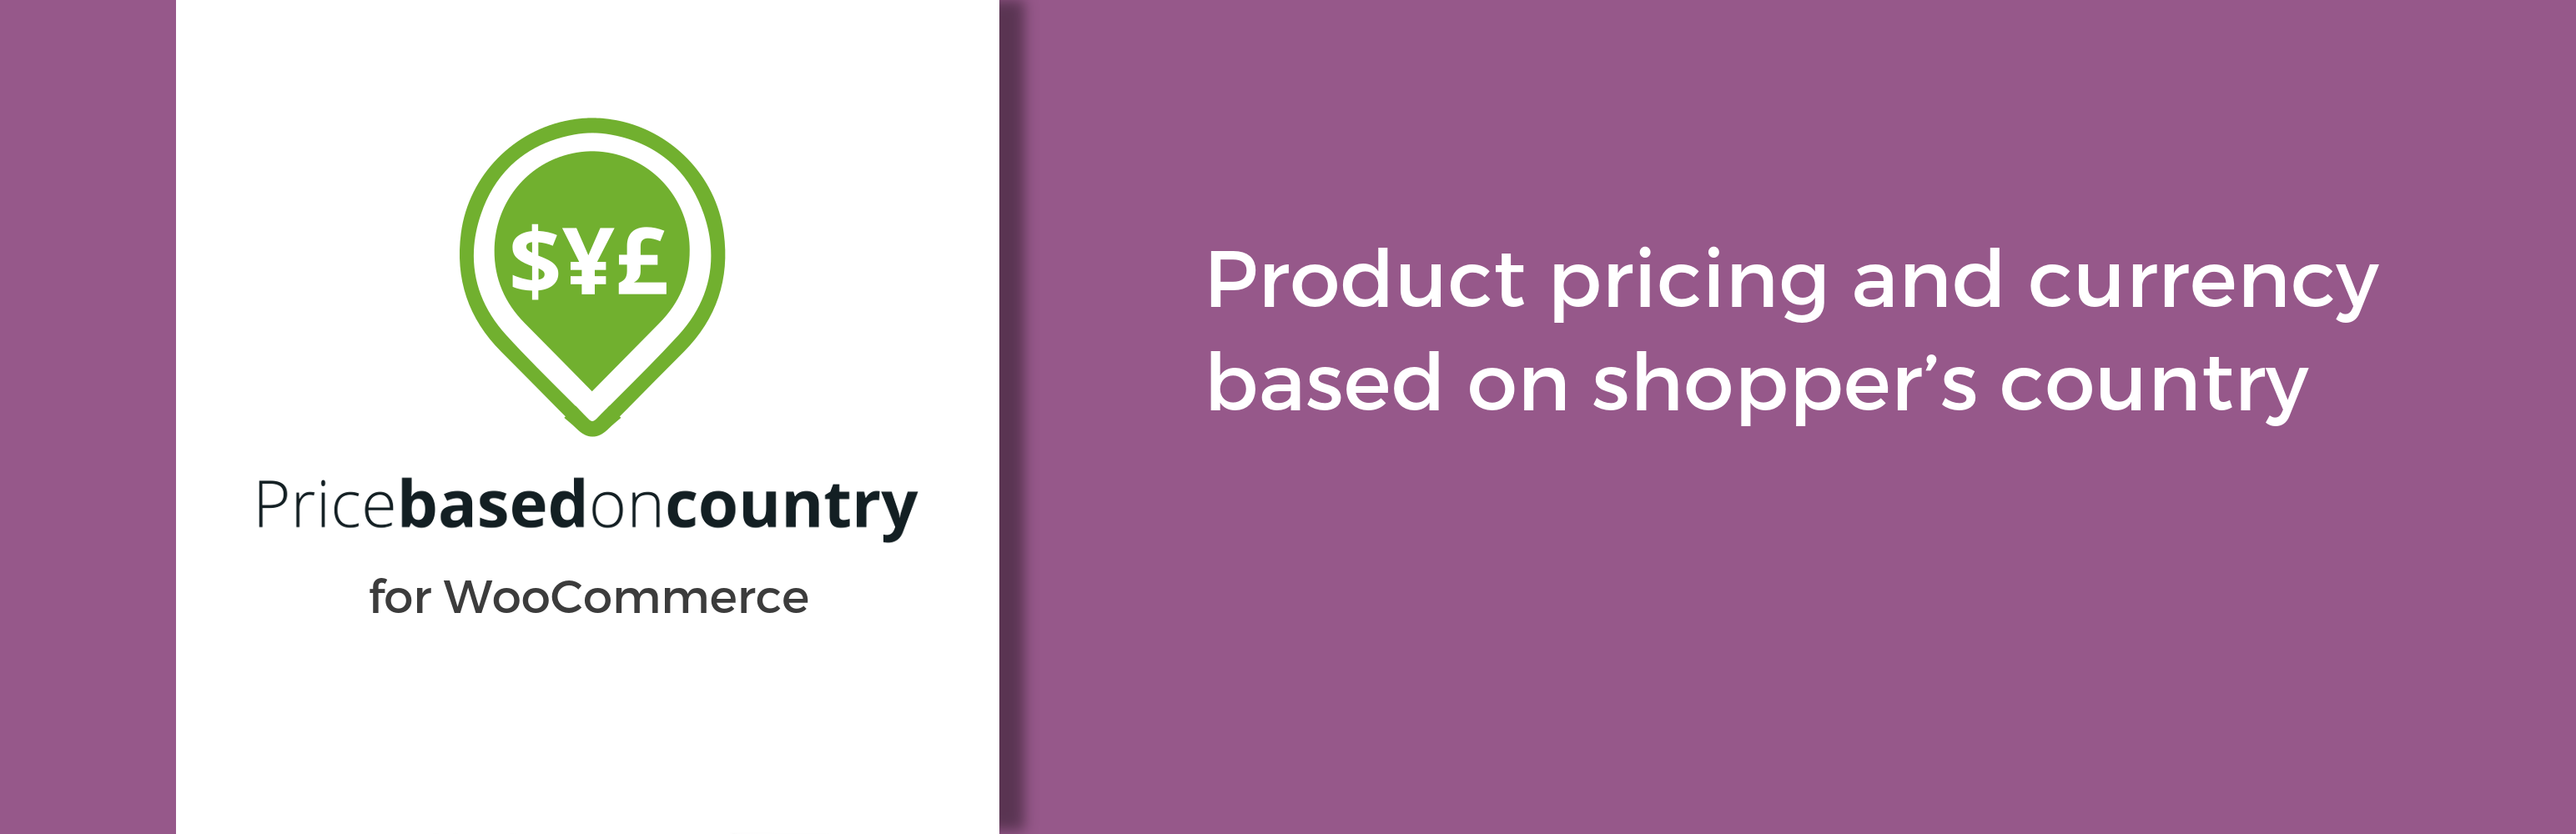 Price Based On Country For Woocommerce